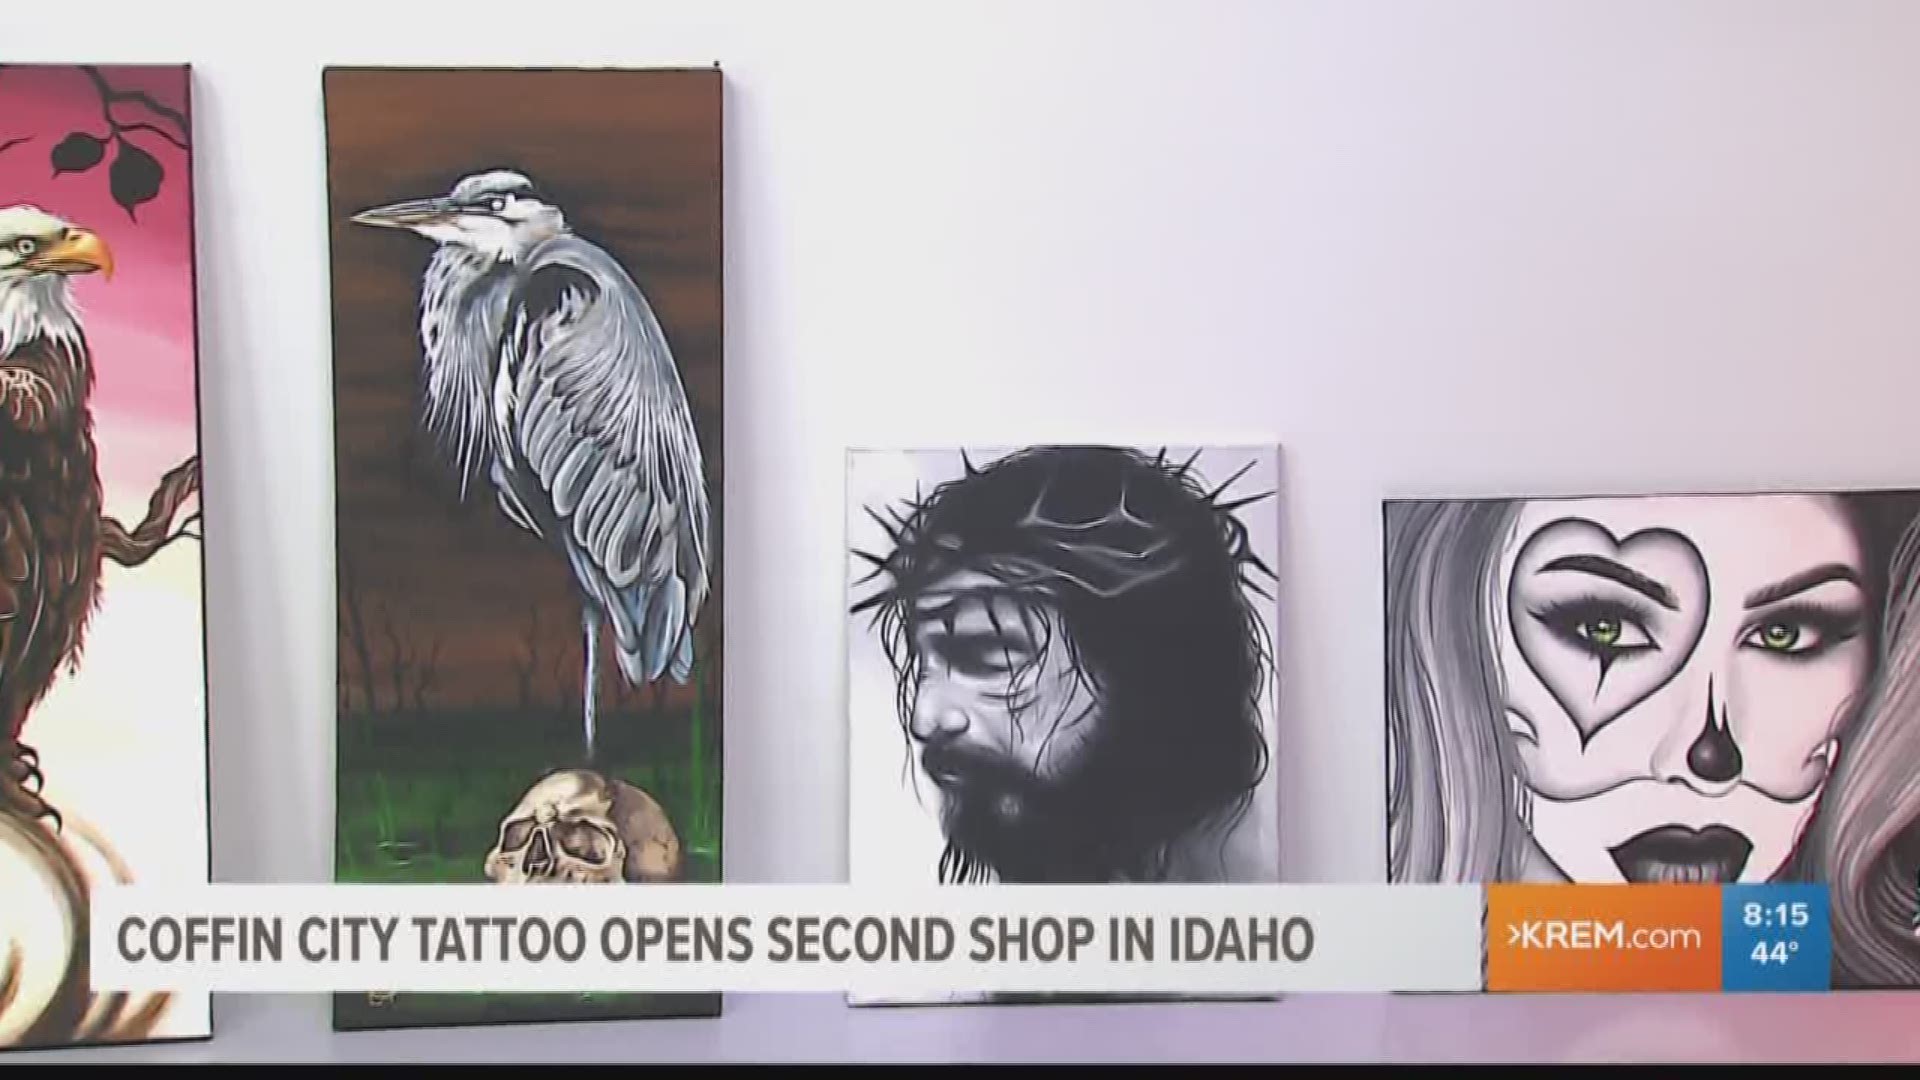 Coffin City Tattoo just opened up a second shop in Stateline, ID. If you live in Moses Lake, you may recognize their name. This is where their first shop is located.